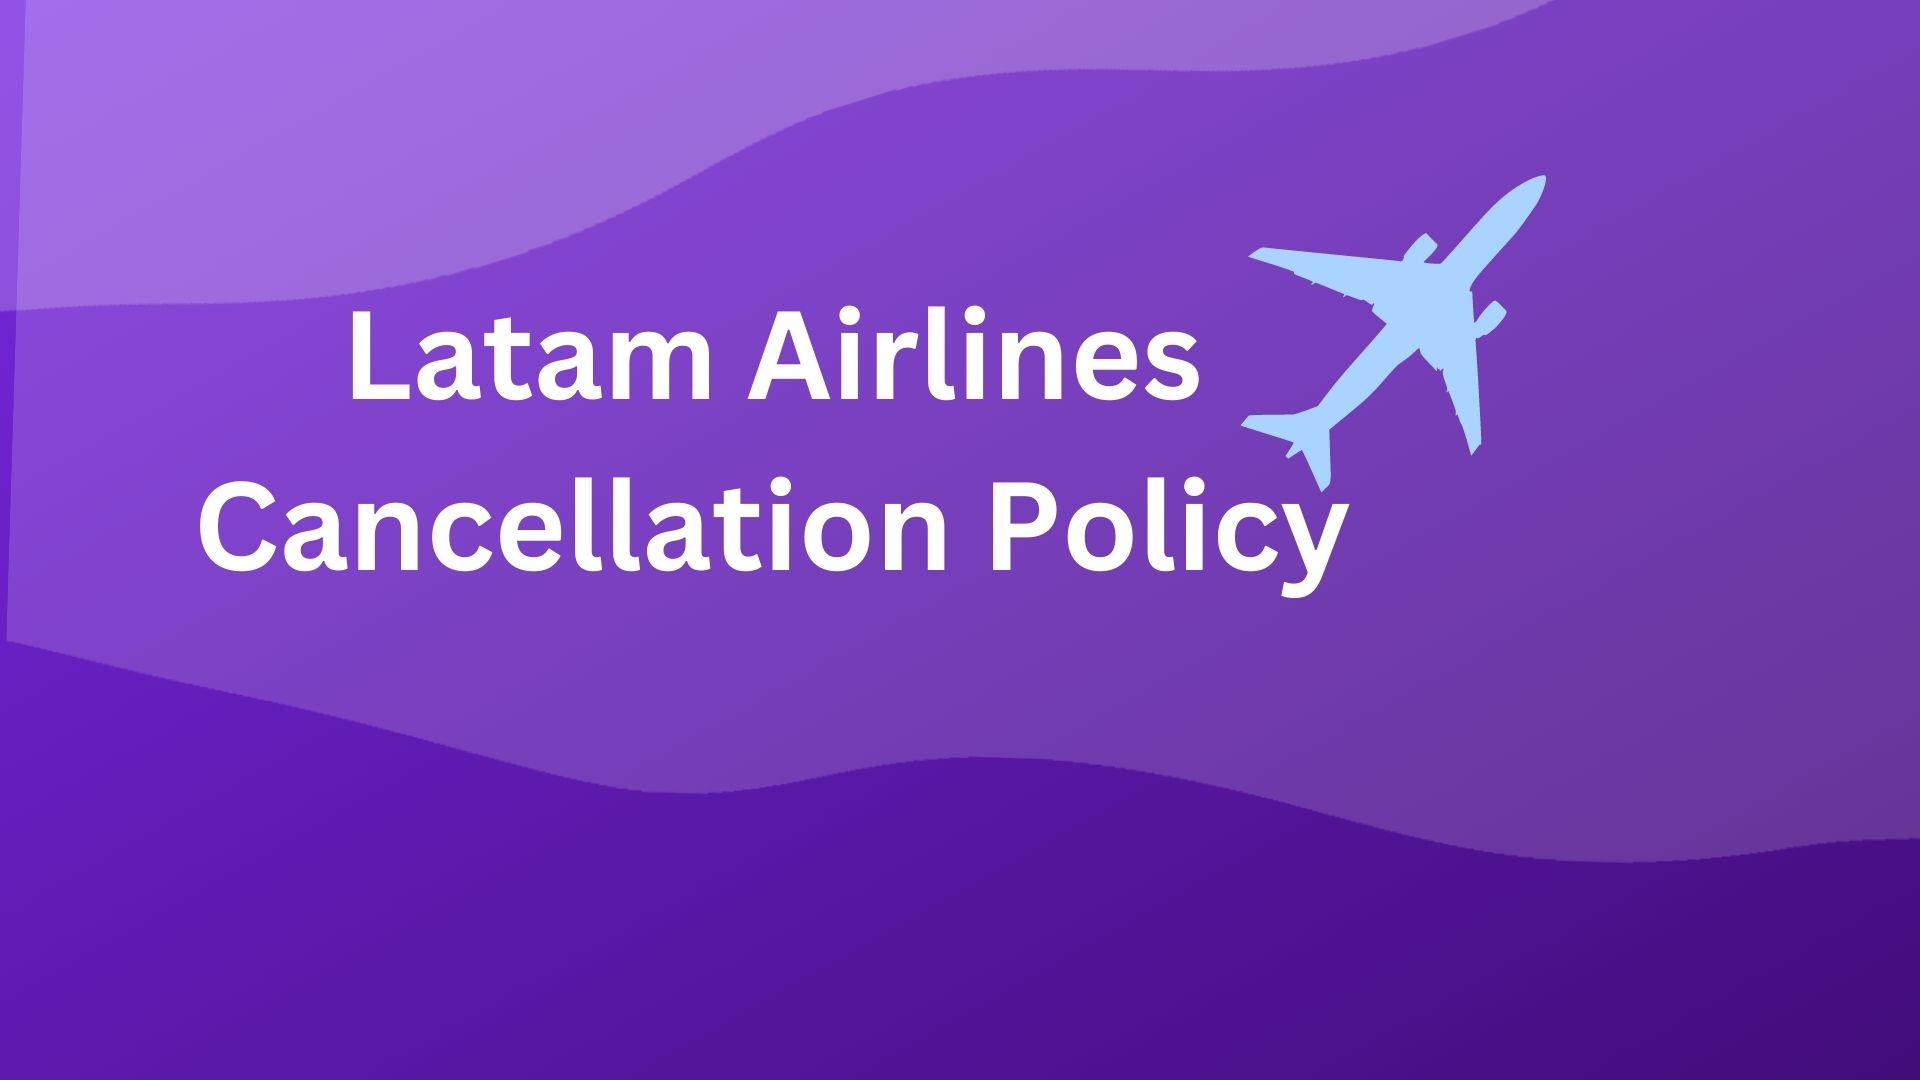 Latam Airlines Cancellation Policy6440de1f1afe6.jpg